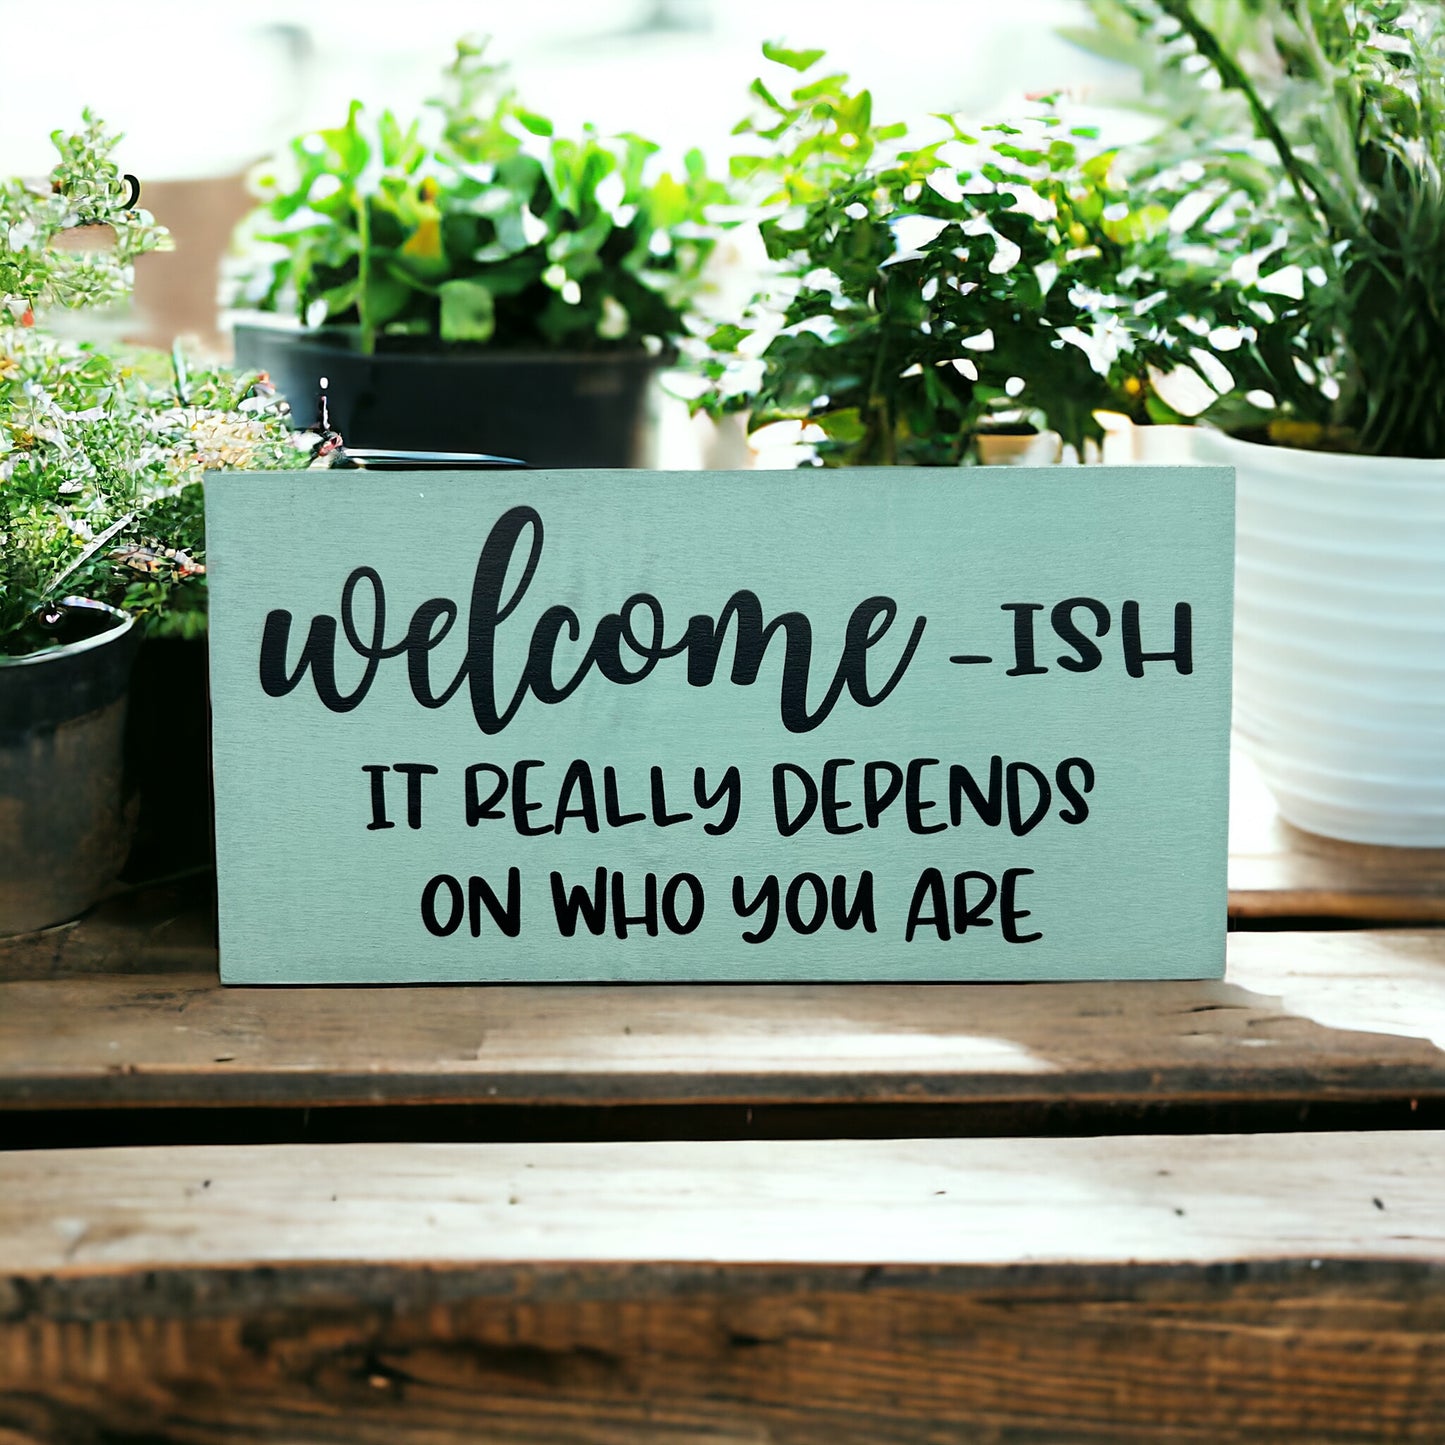 Welcomeish - Funny Rustic White Wood Sign